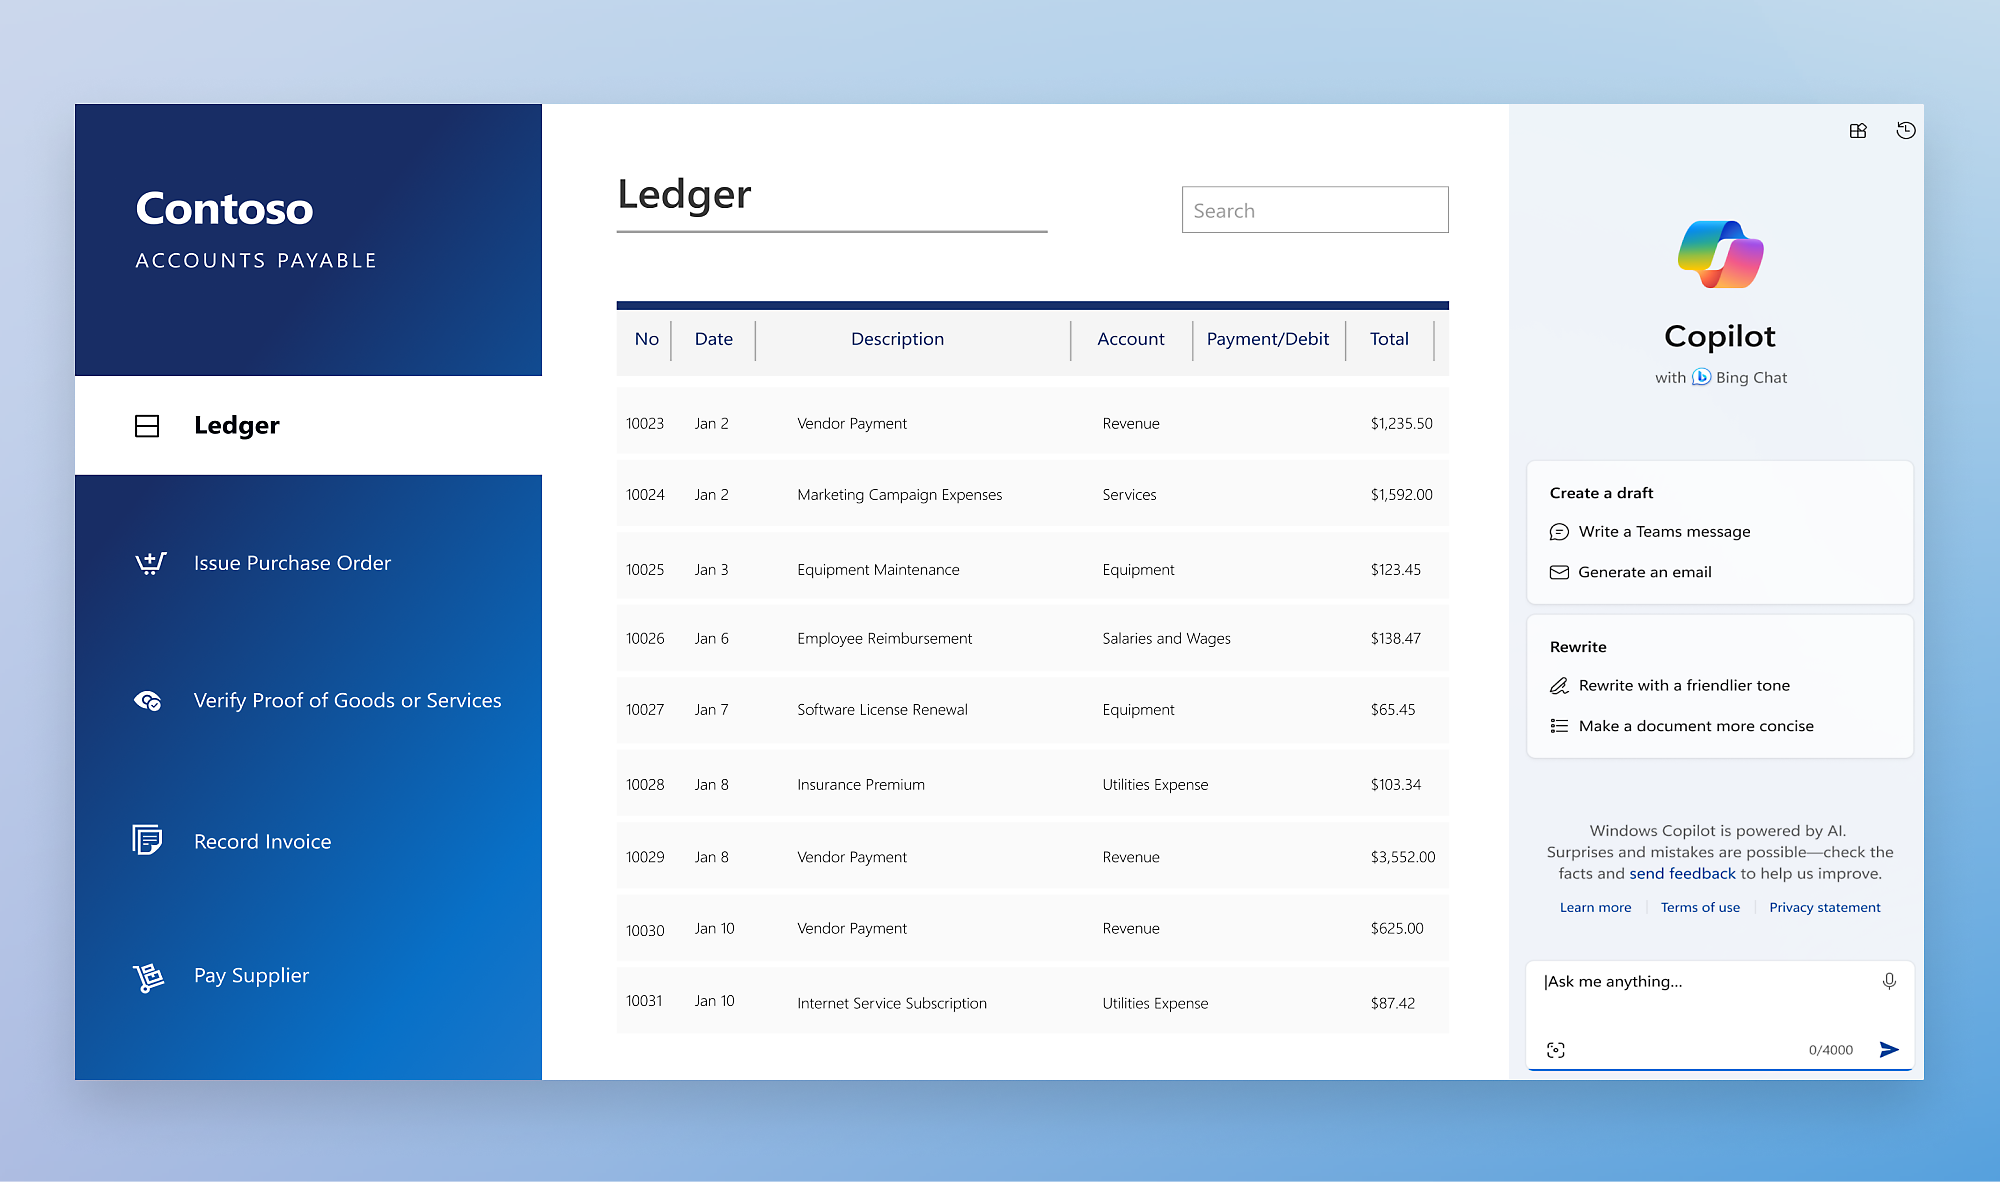 Contoso Ledger - Accounts Payable interface with options for purchase orders, invoices, and payments.